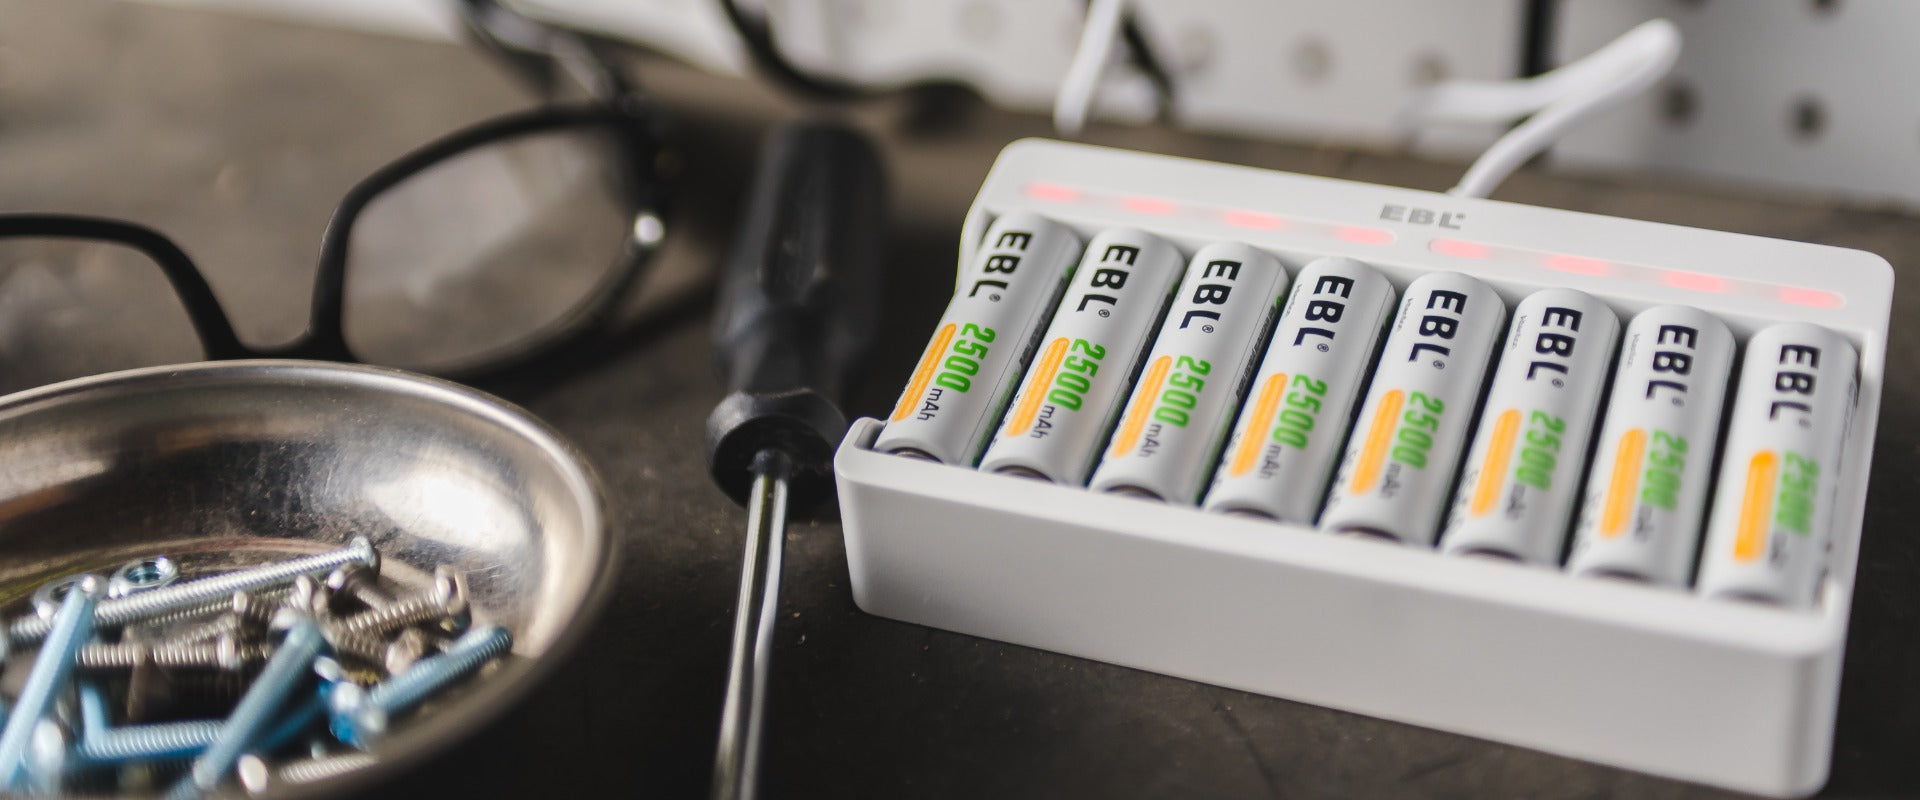 Essential Tips for Using EBL Battery Chargers